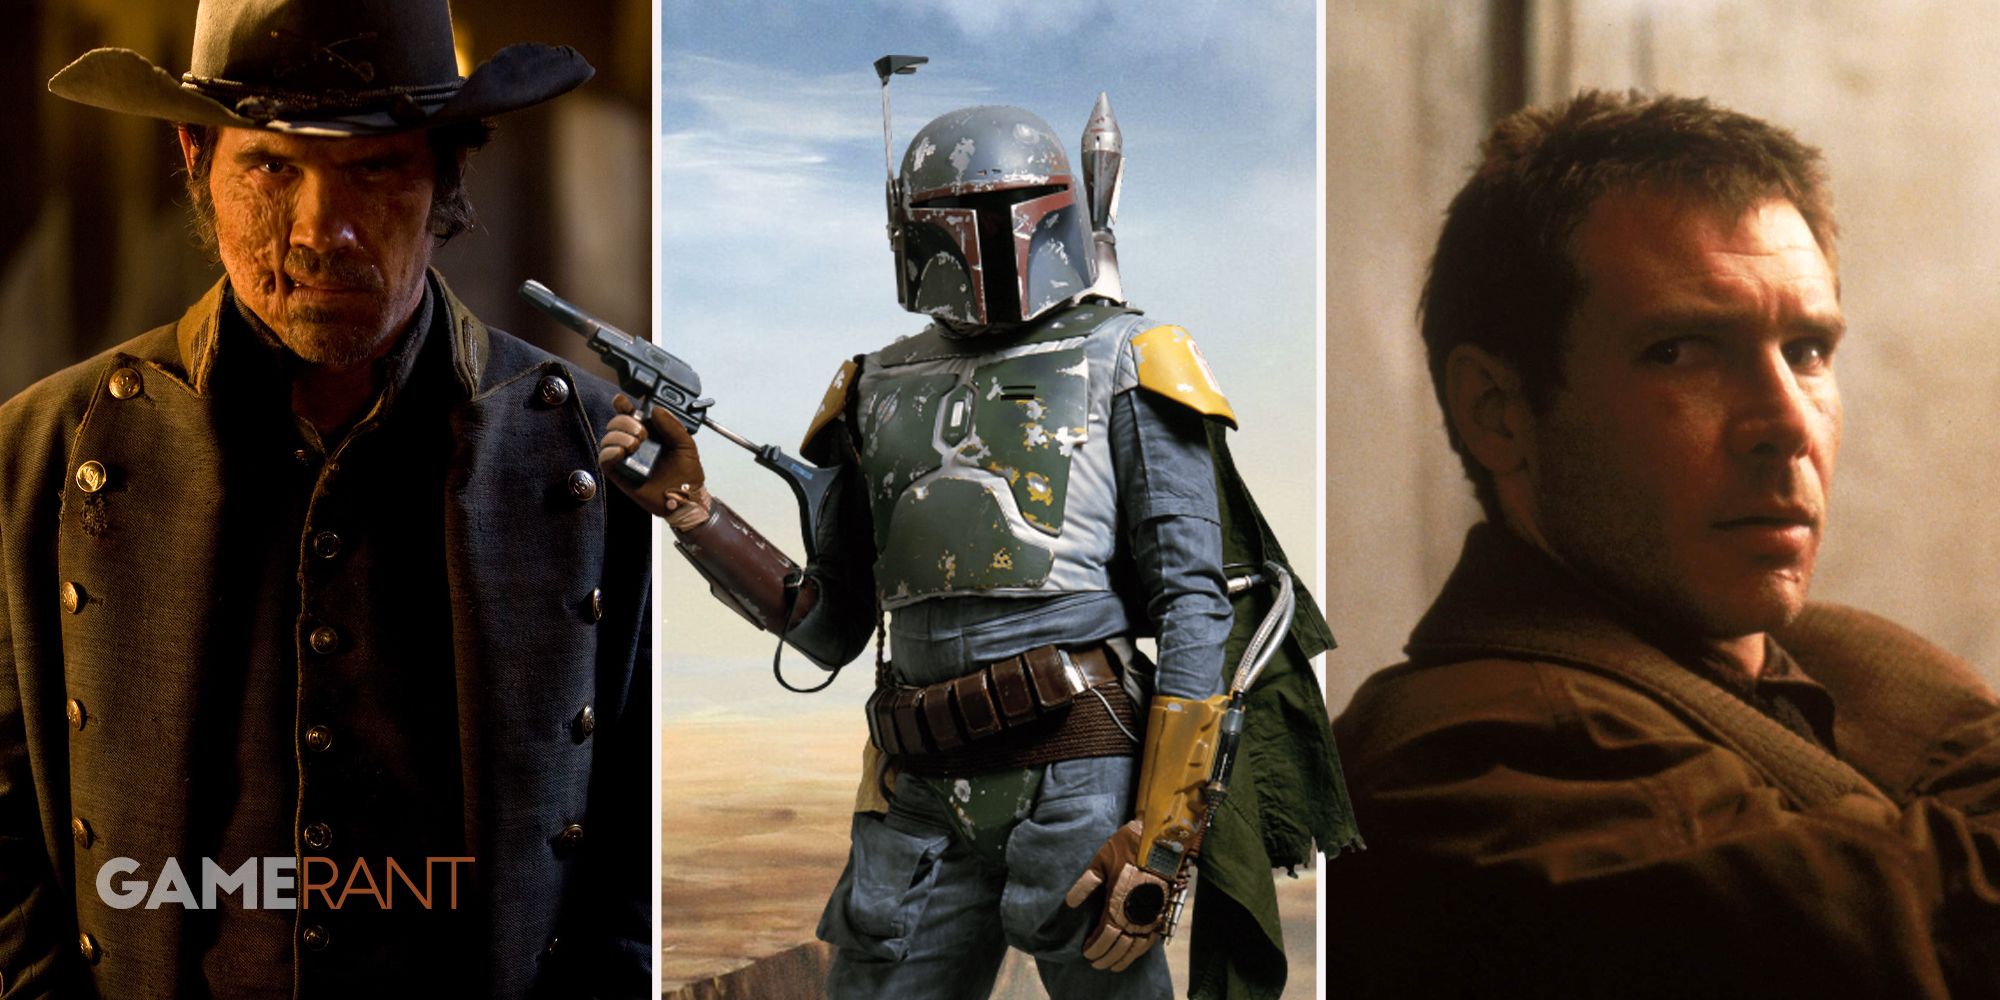 Sci-fi: Why Are There So Many Bounty Hunters In Space?